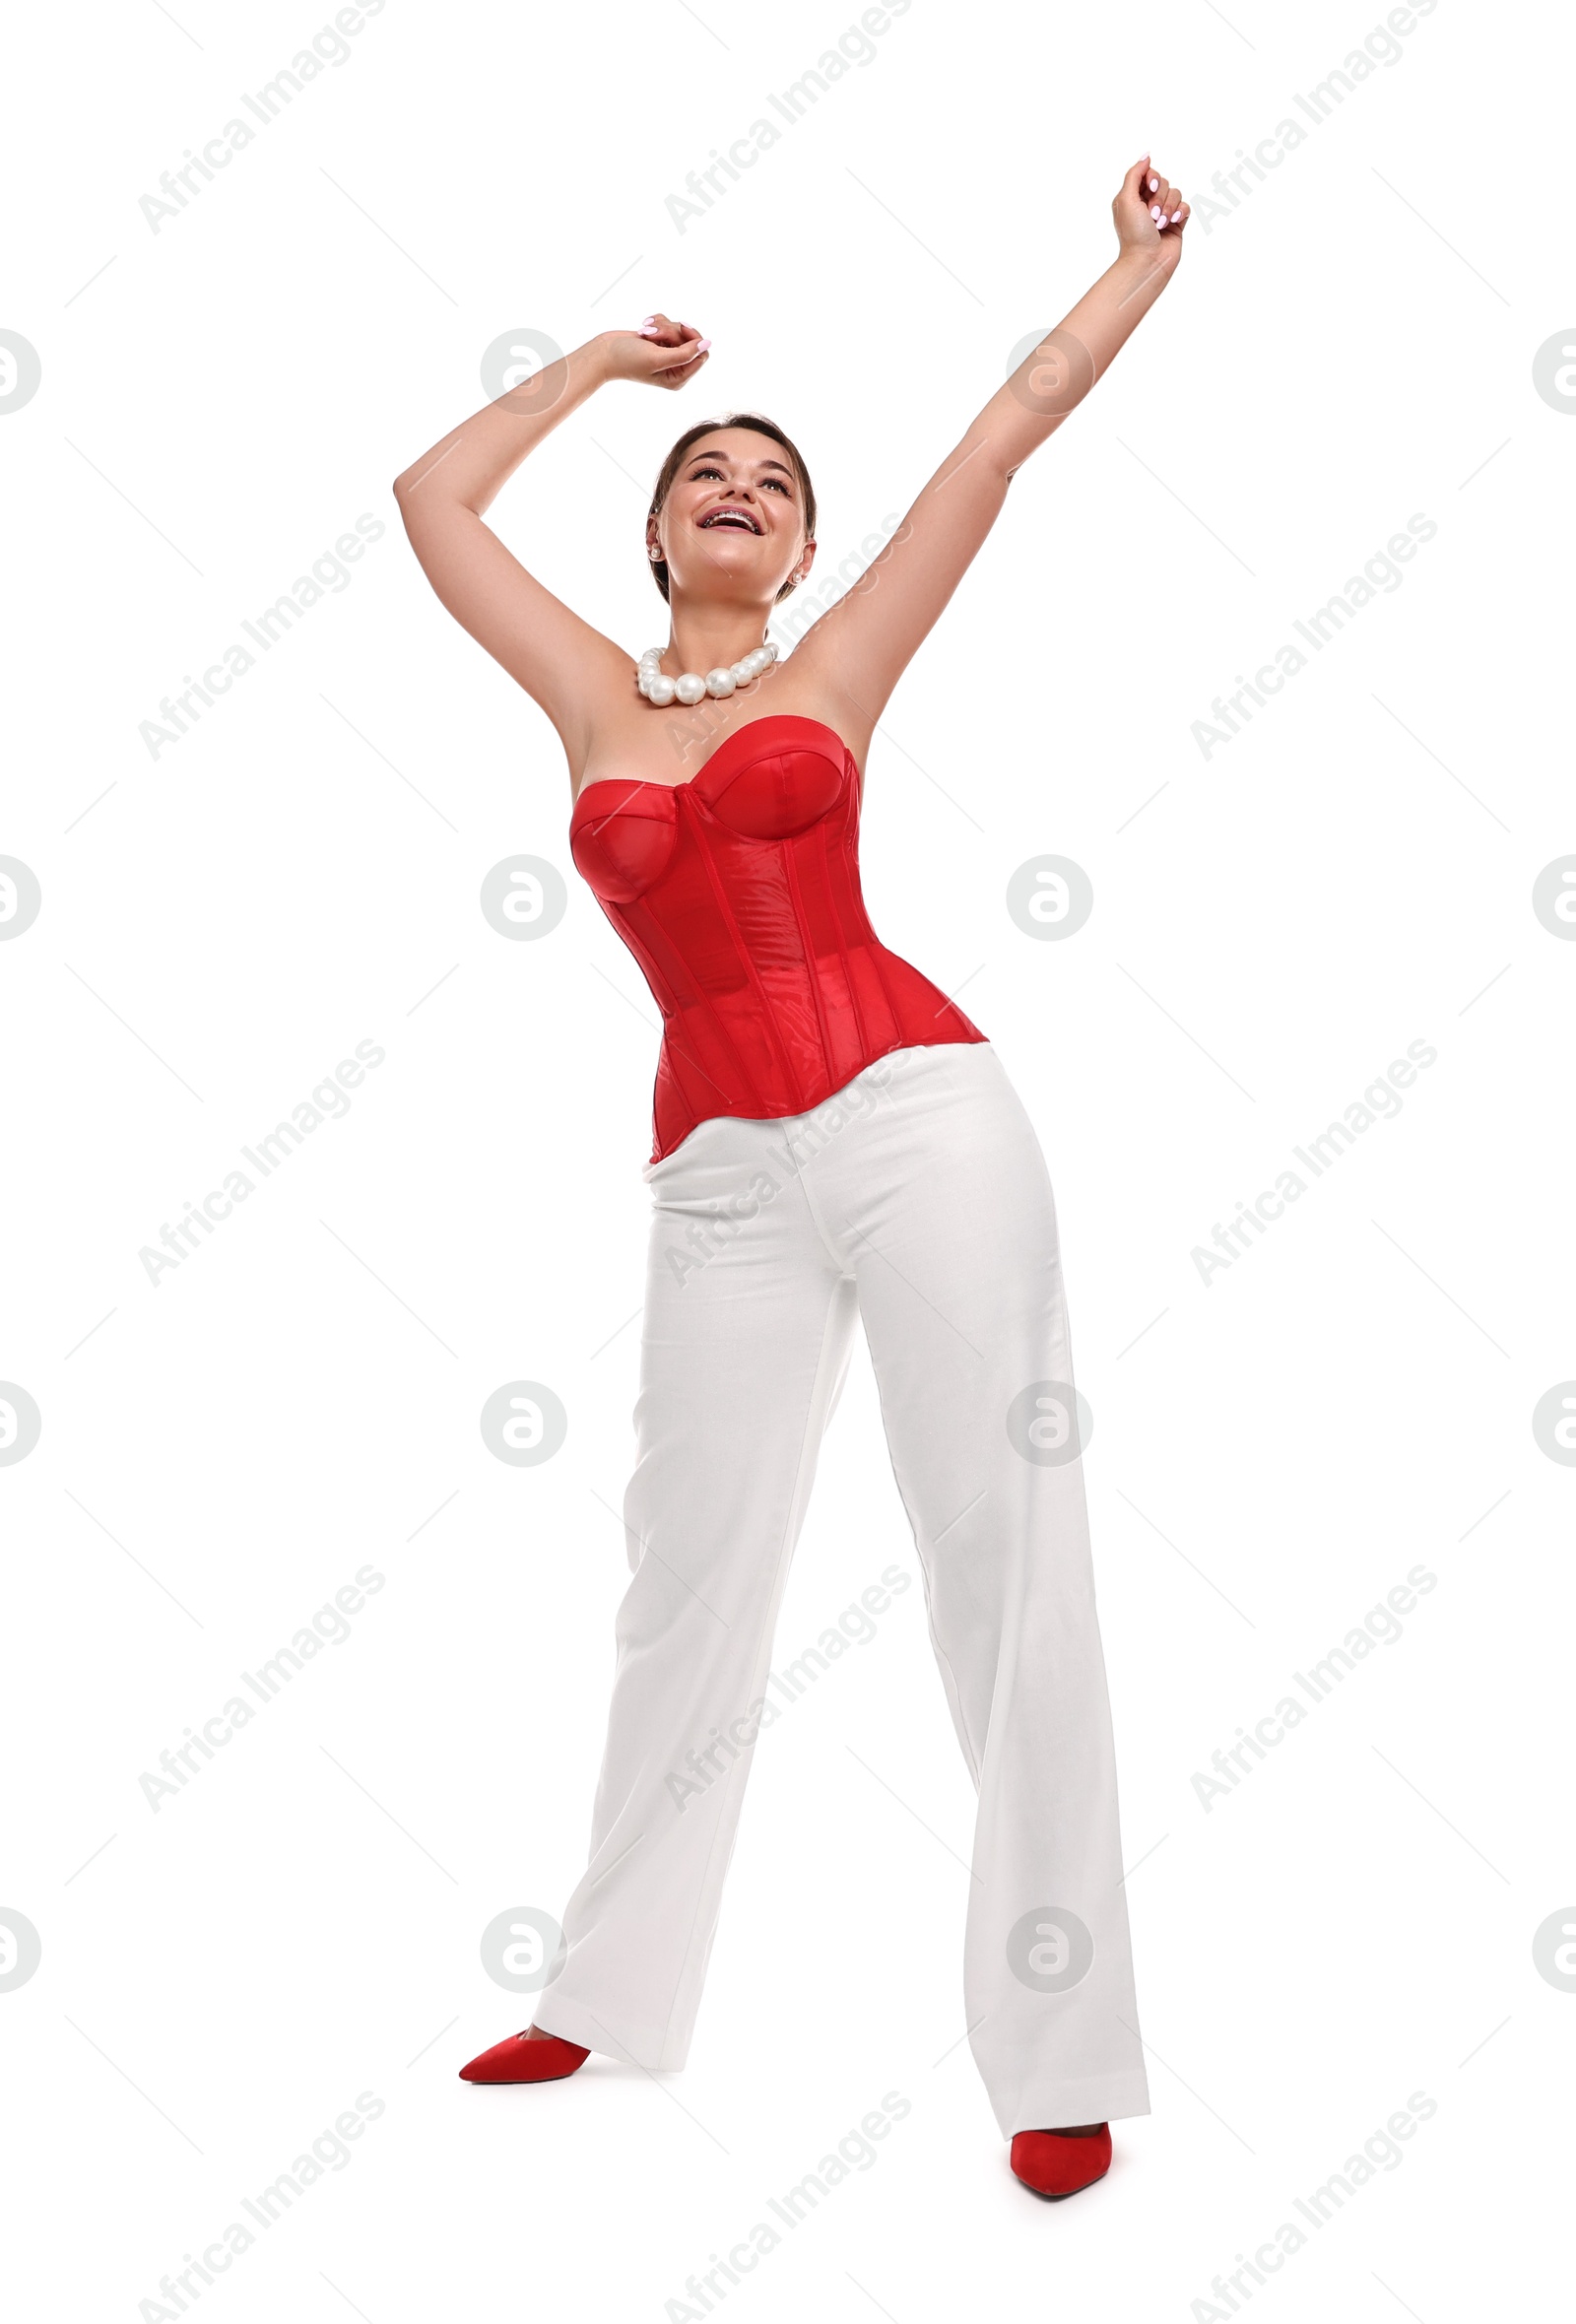 Photo of Smiling woman in red corset posing on white background, low angle view